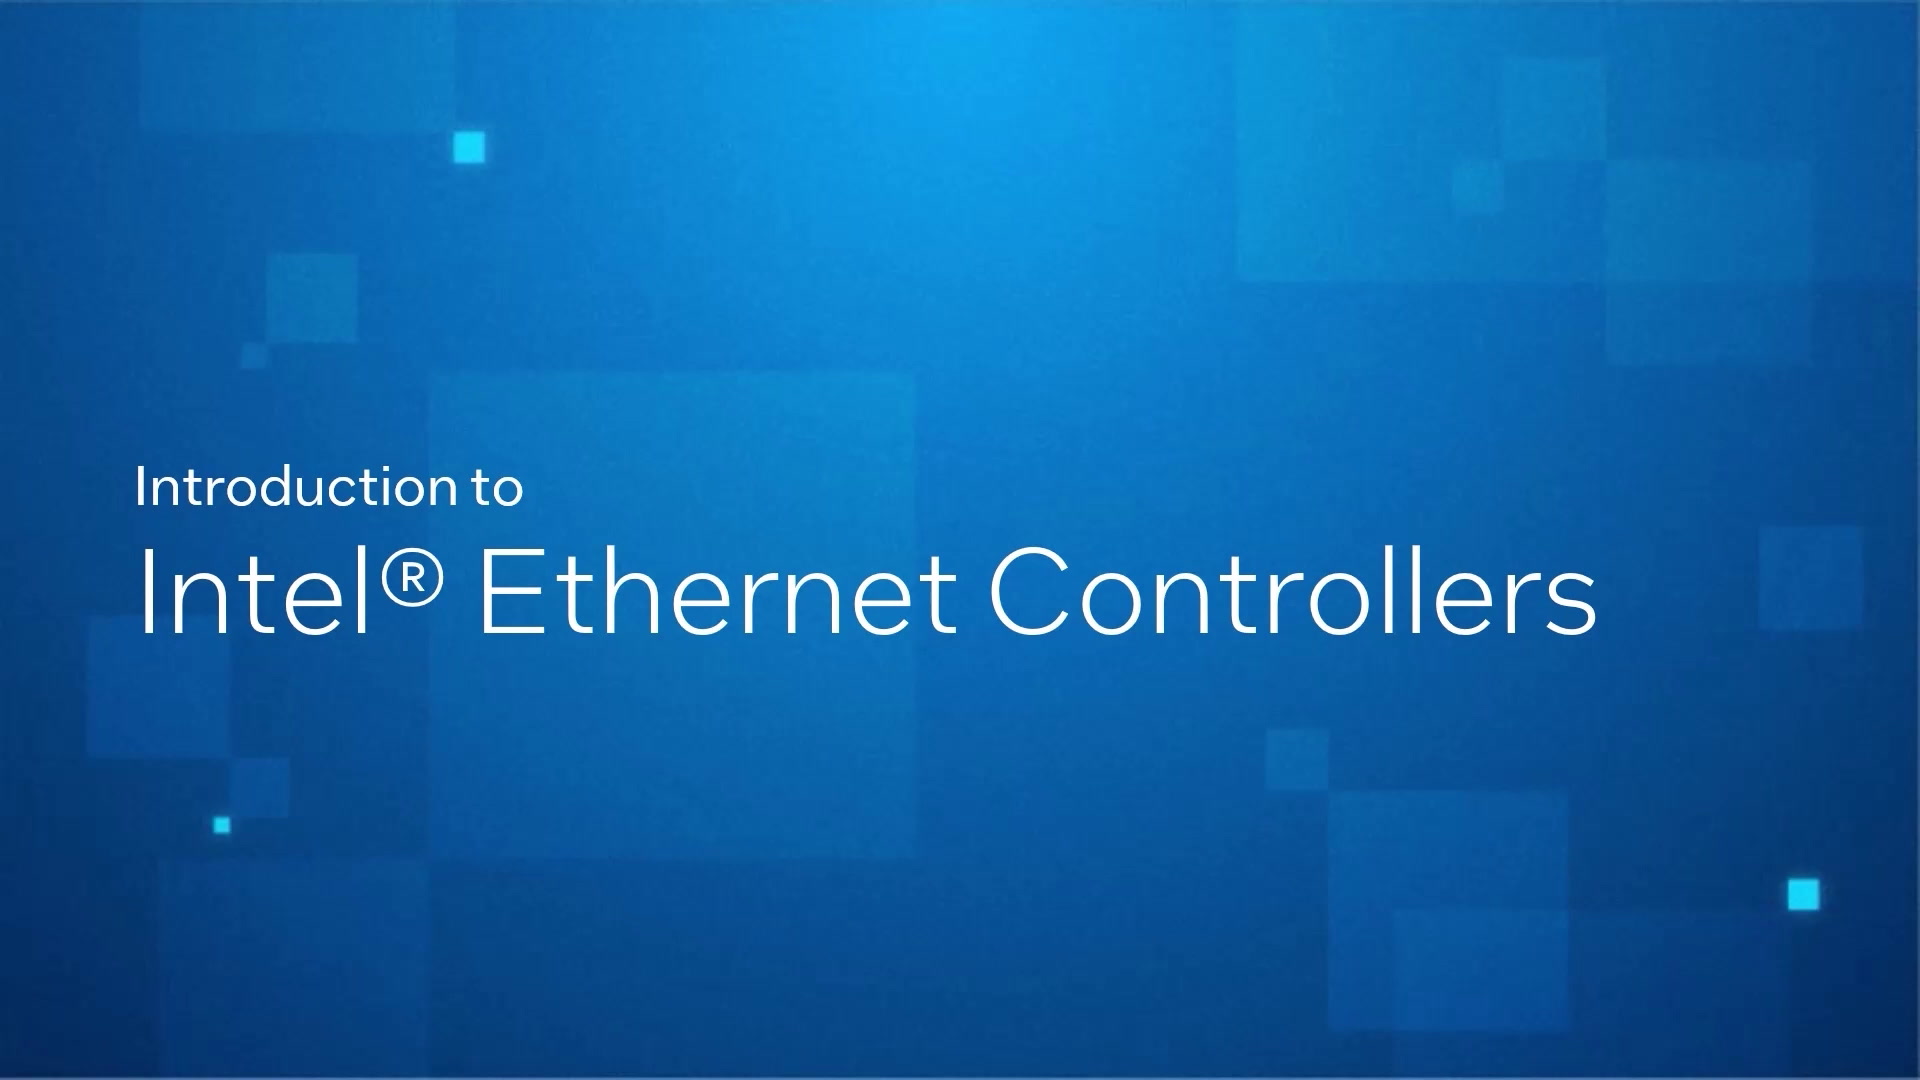 Introduction to Intel® Ethernet Controllers